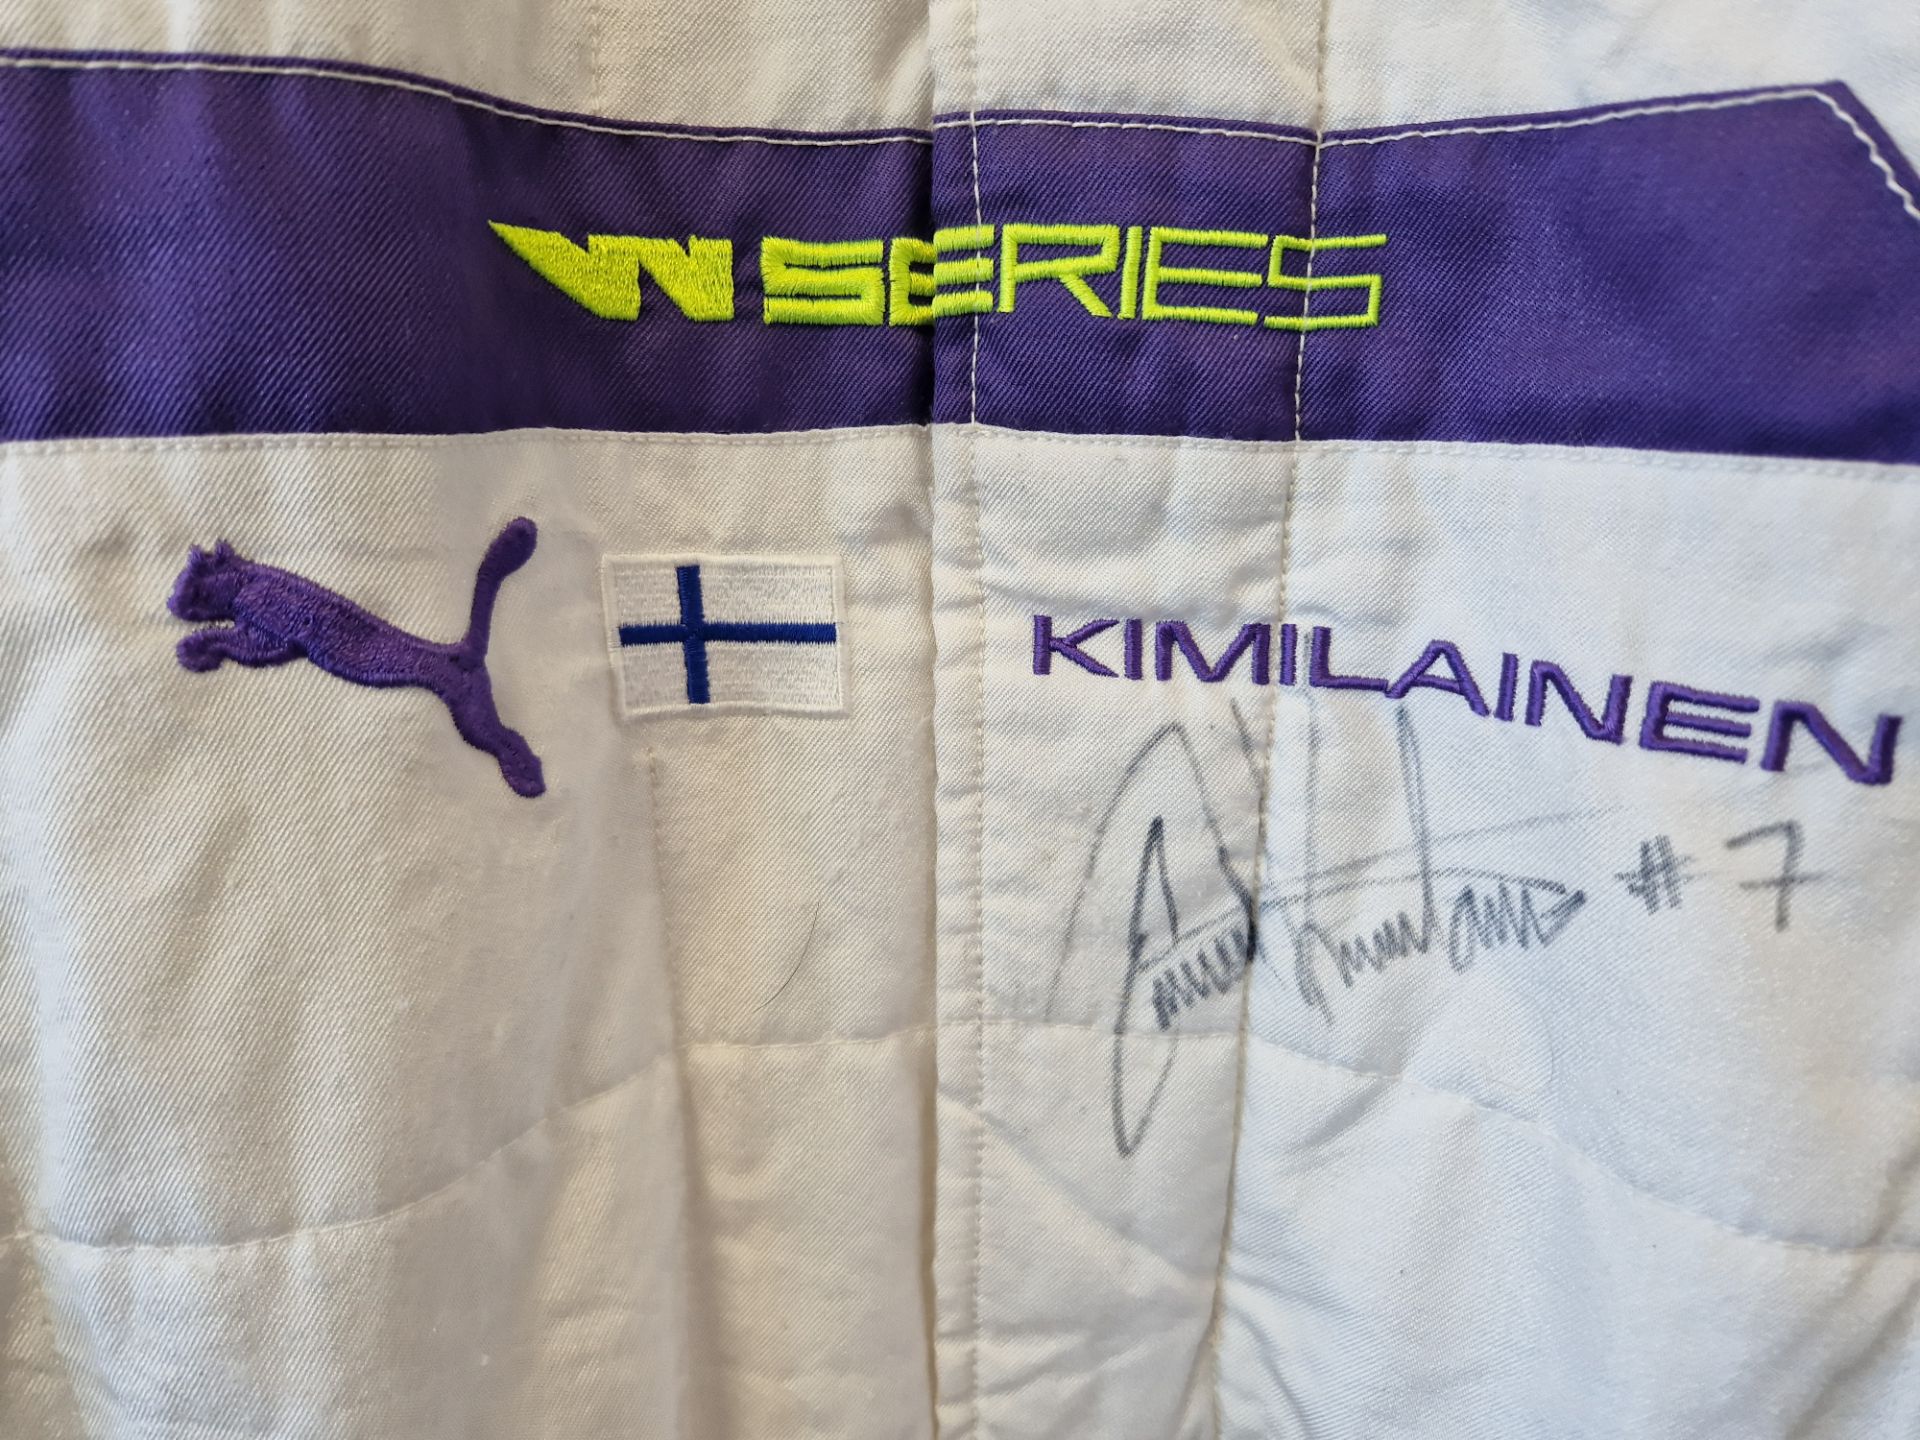 One PUMA FIA approved Race Suit (Size - Made to Measure) worn by Emma Kimilainen and signed by her w - Image 2 of 2